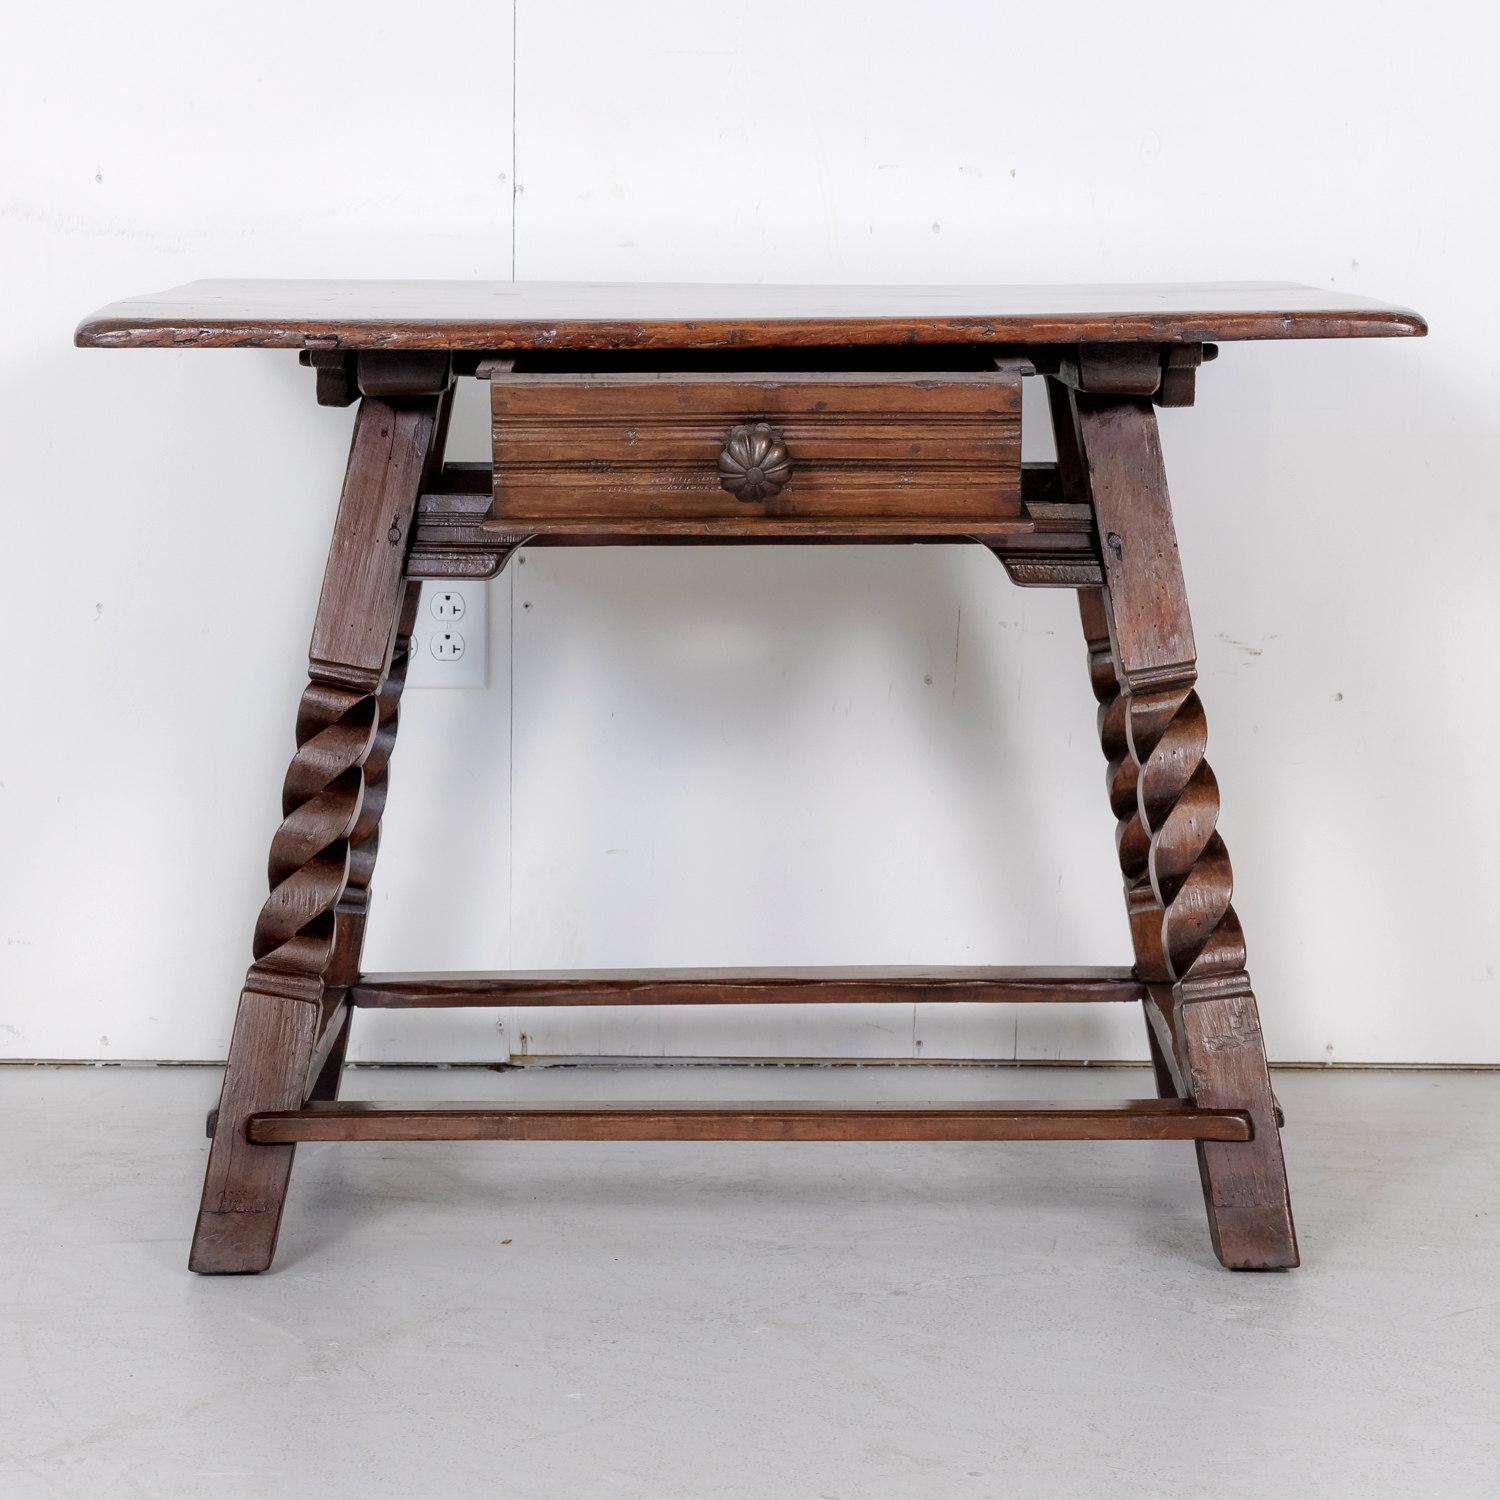 Rustic 18th century Spanish Baroque period side table handcrafted in the early 1700s of solid walnut in the Catalan region having a rectangular top decorated with fruitwood inlay forming the word ANNO and the date 1717, as well as the initials FMCC